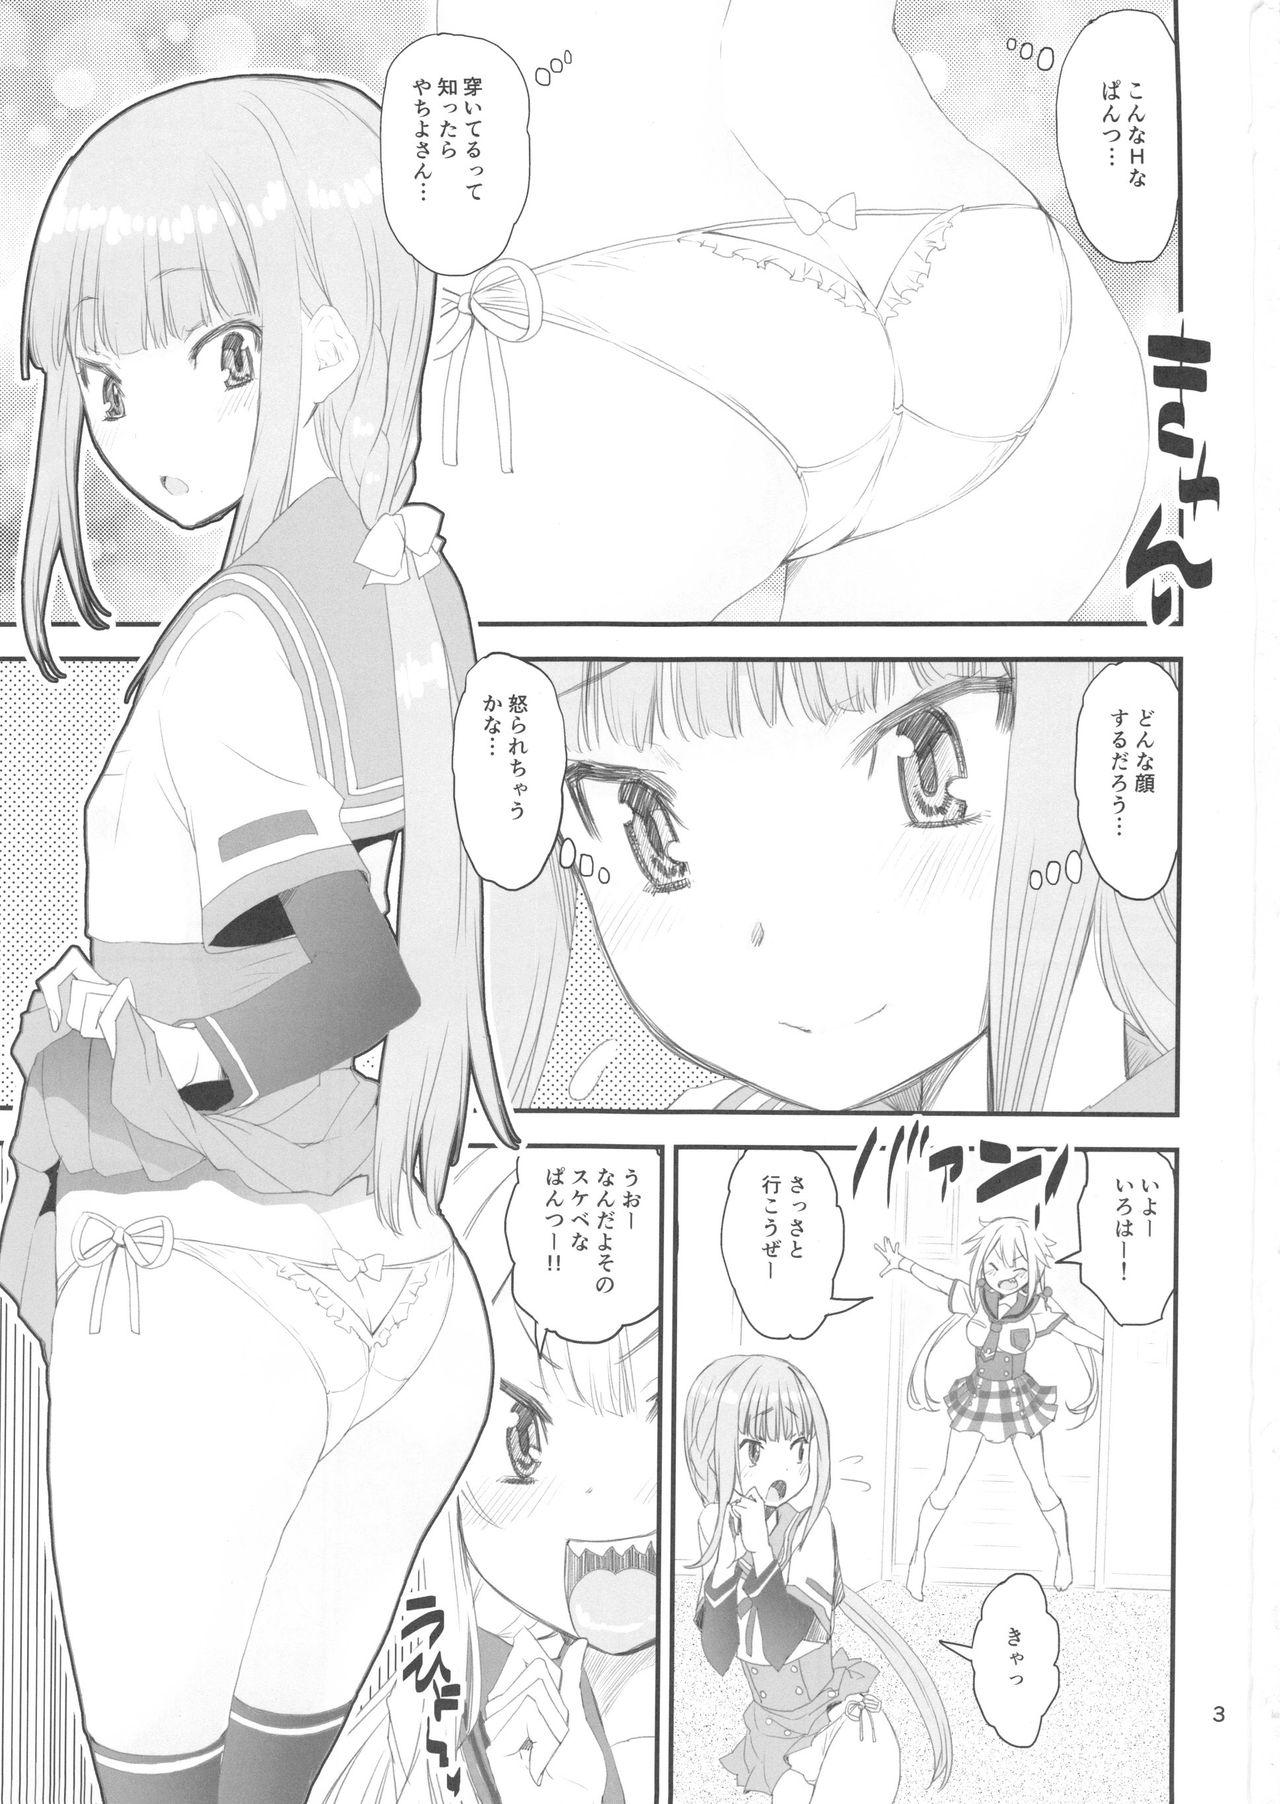 Ametur Porn Keisotsu Les Osesse no Machi - Puella magi madoka magica Puella magi madoka magica side story magia record Watersports - Page 3